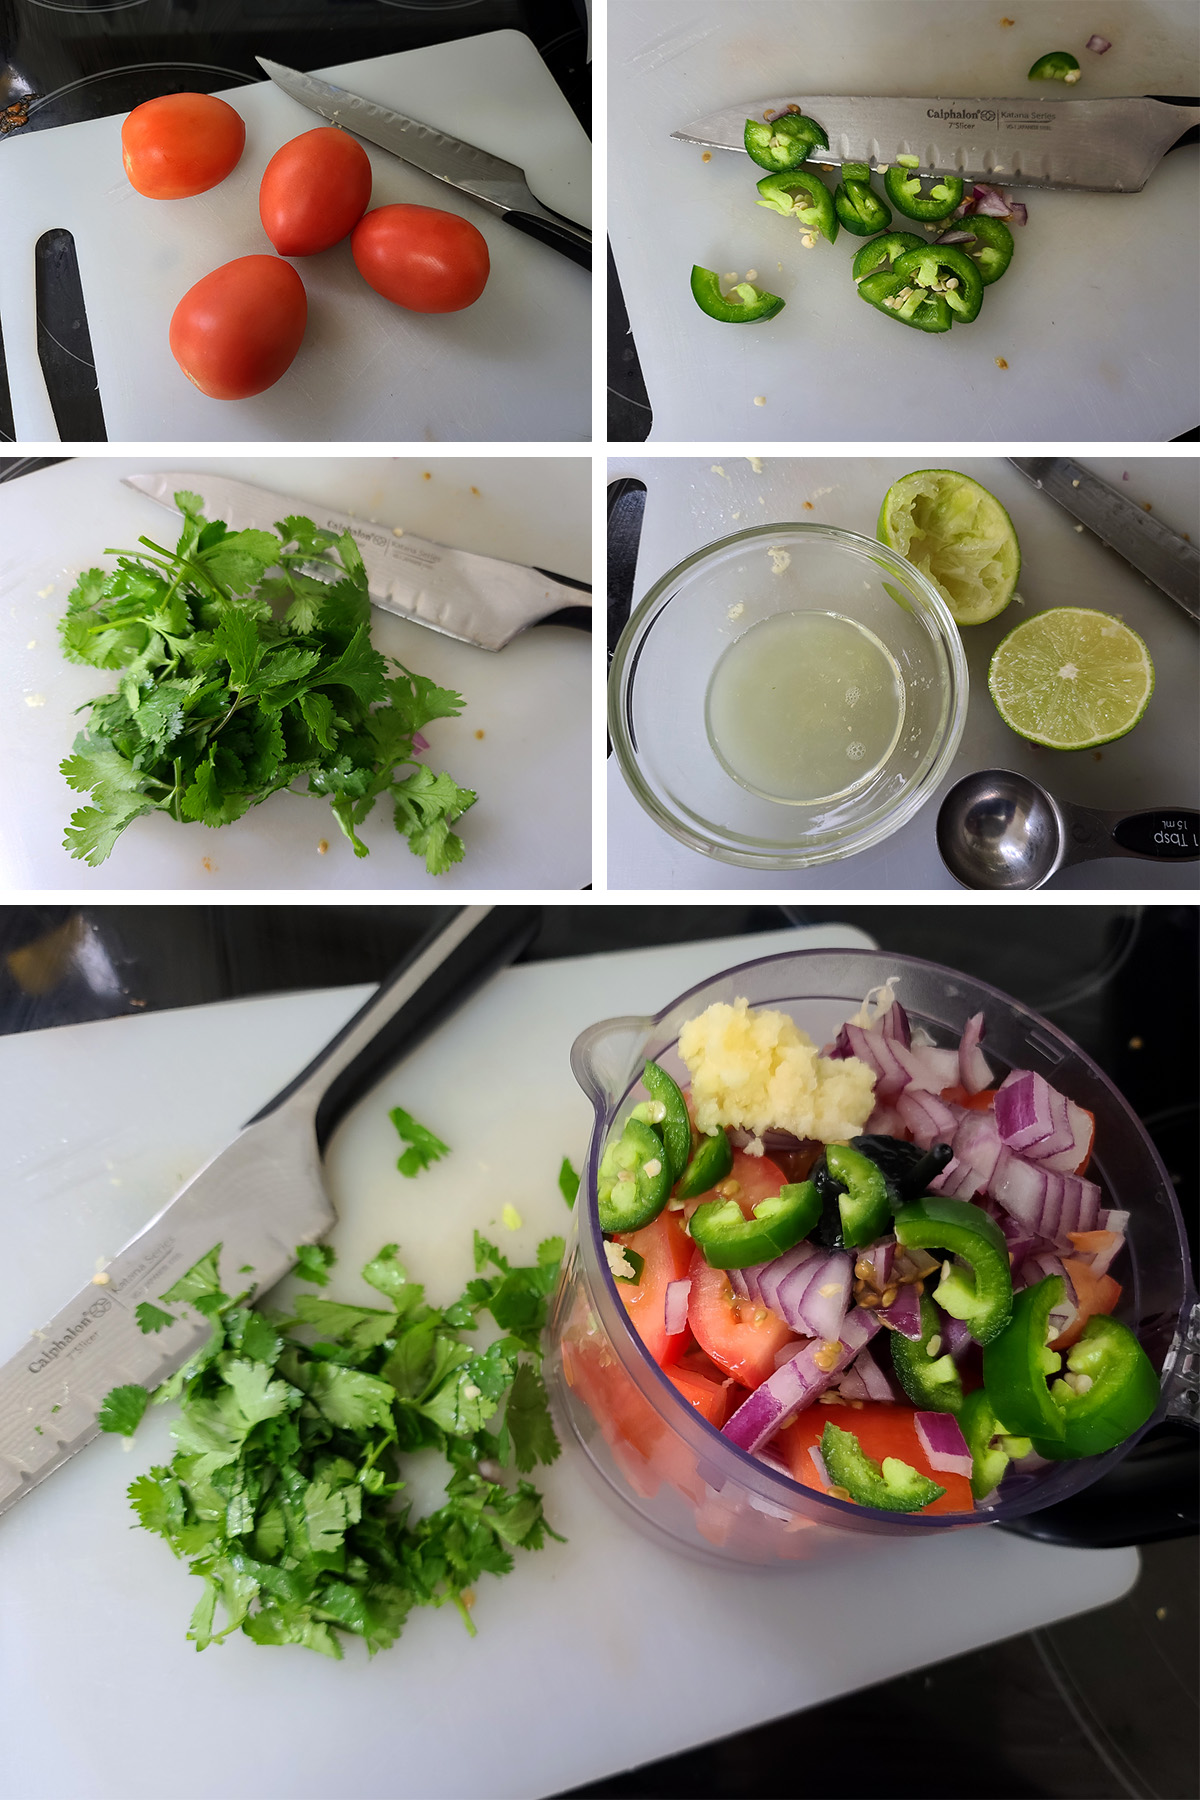 A 5 part image showing ingredients being chopped, ready to blend ina  food processor.